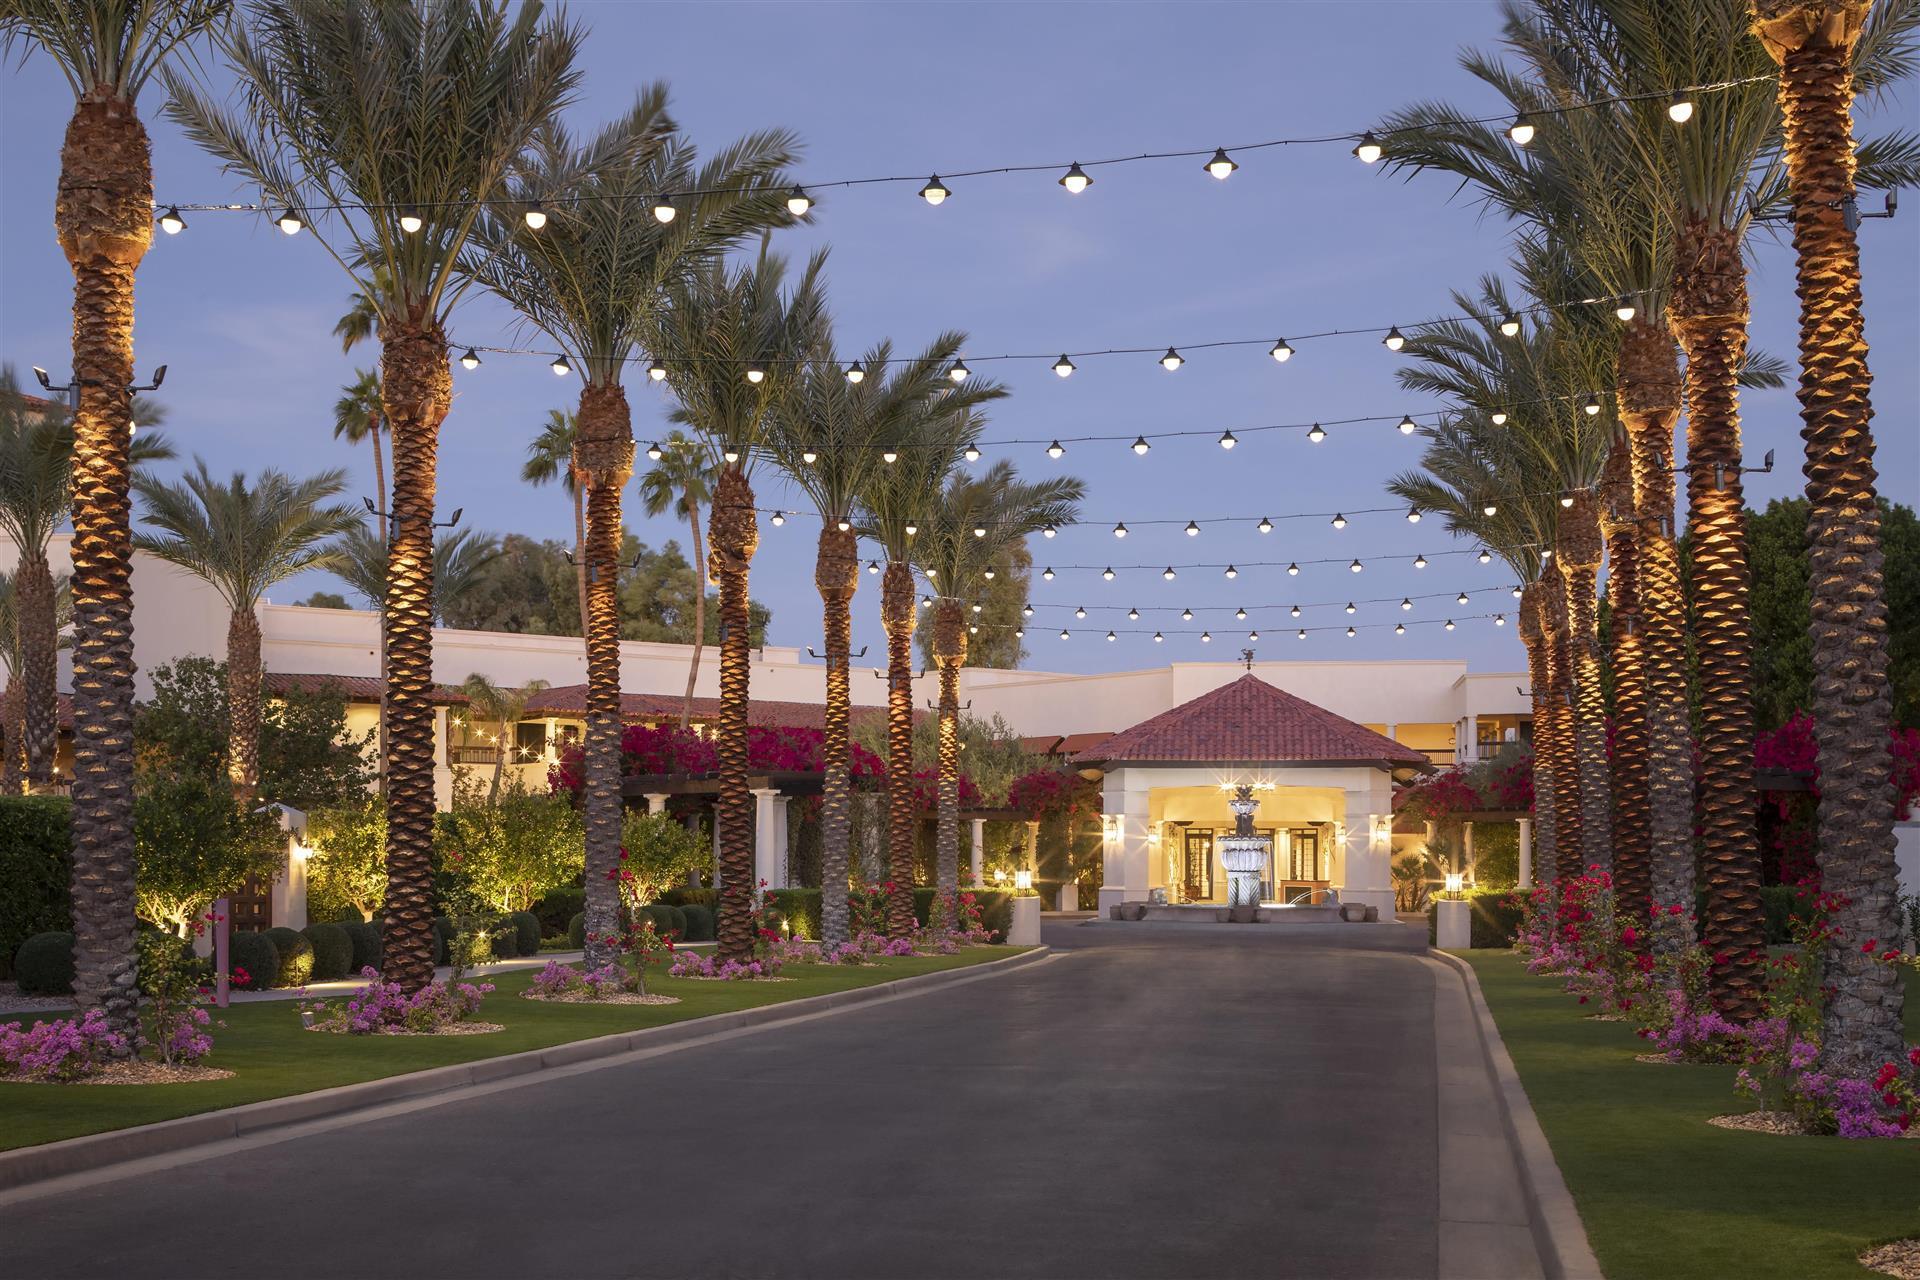 The Scottsdale Resort and Spa, Curio Collection by Hilton in Scottsdale, AZ